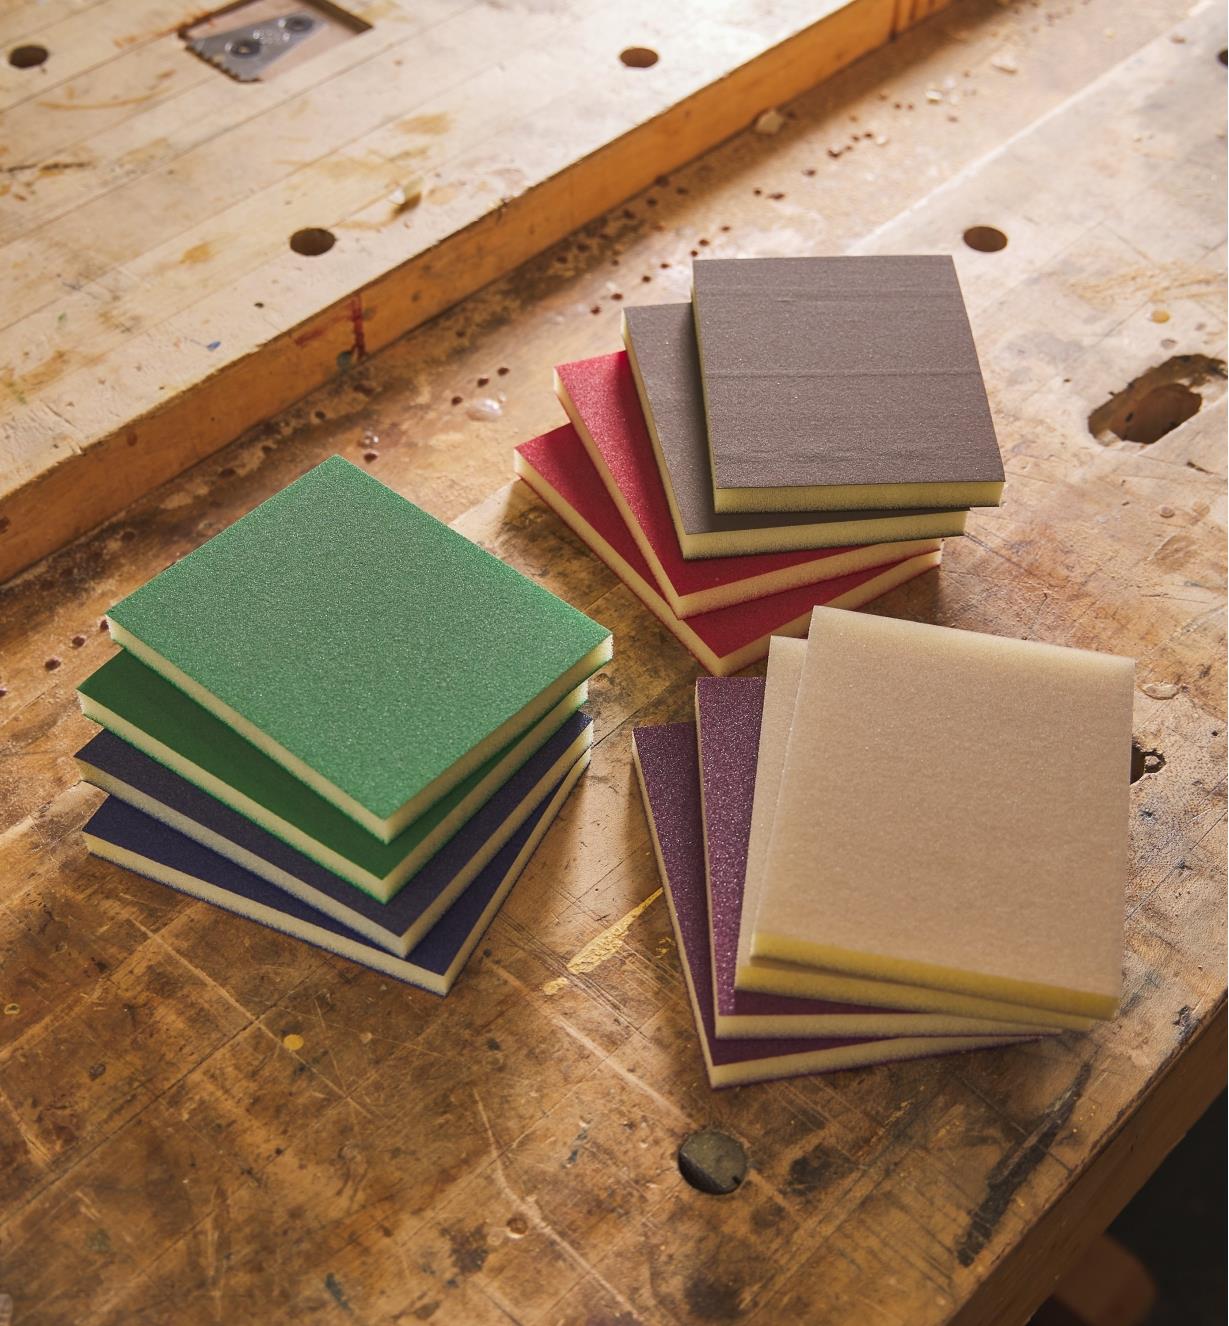 Three stacks of different-colored sponge sheets on a workbench